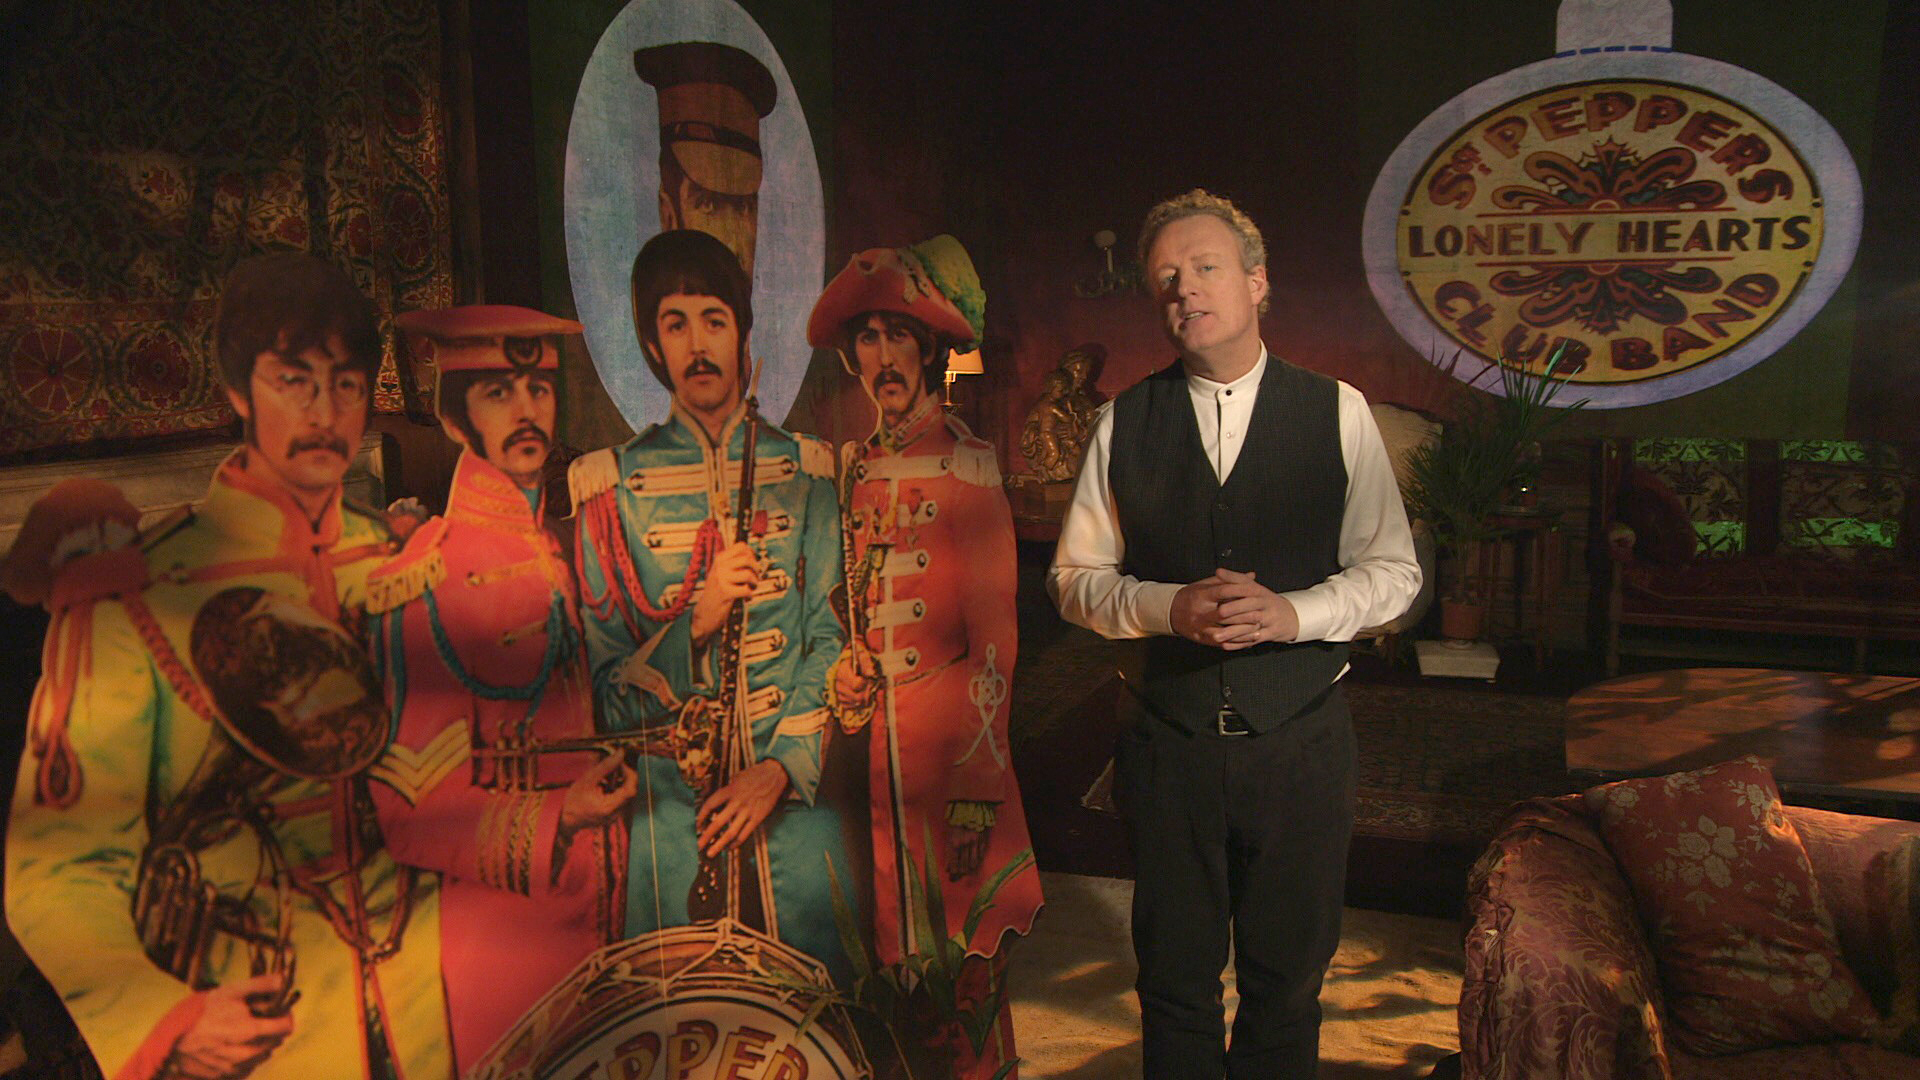 The BBC To Celebrate The 50th Anniversary of Sgt. Pepper's Lonely Hearts Club Band.